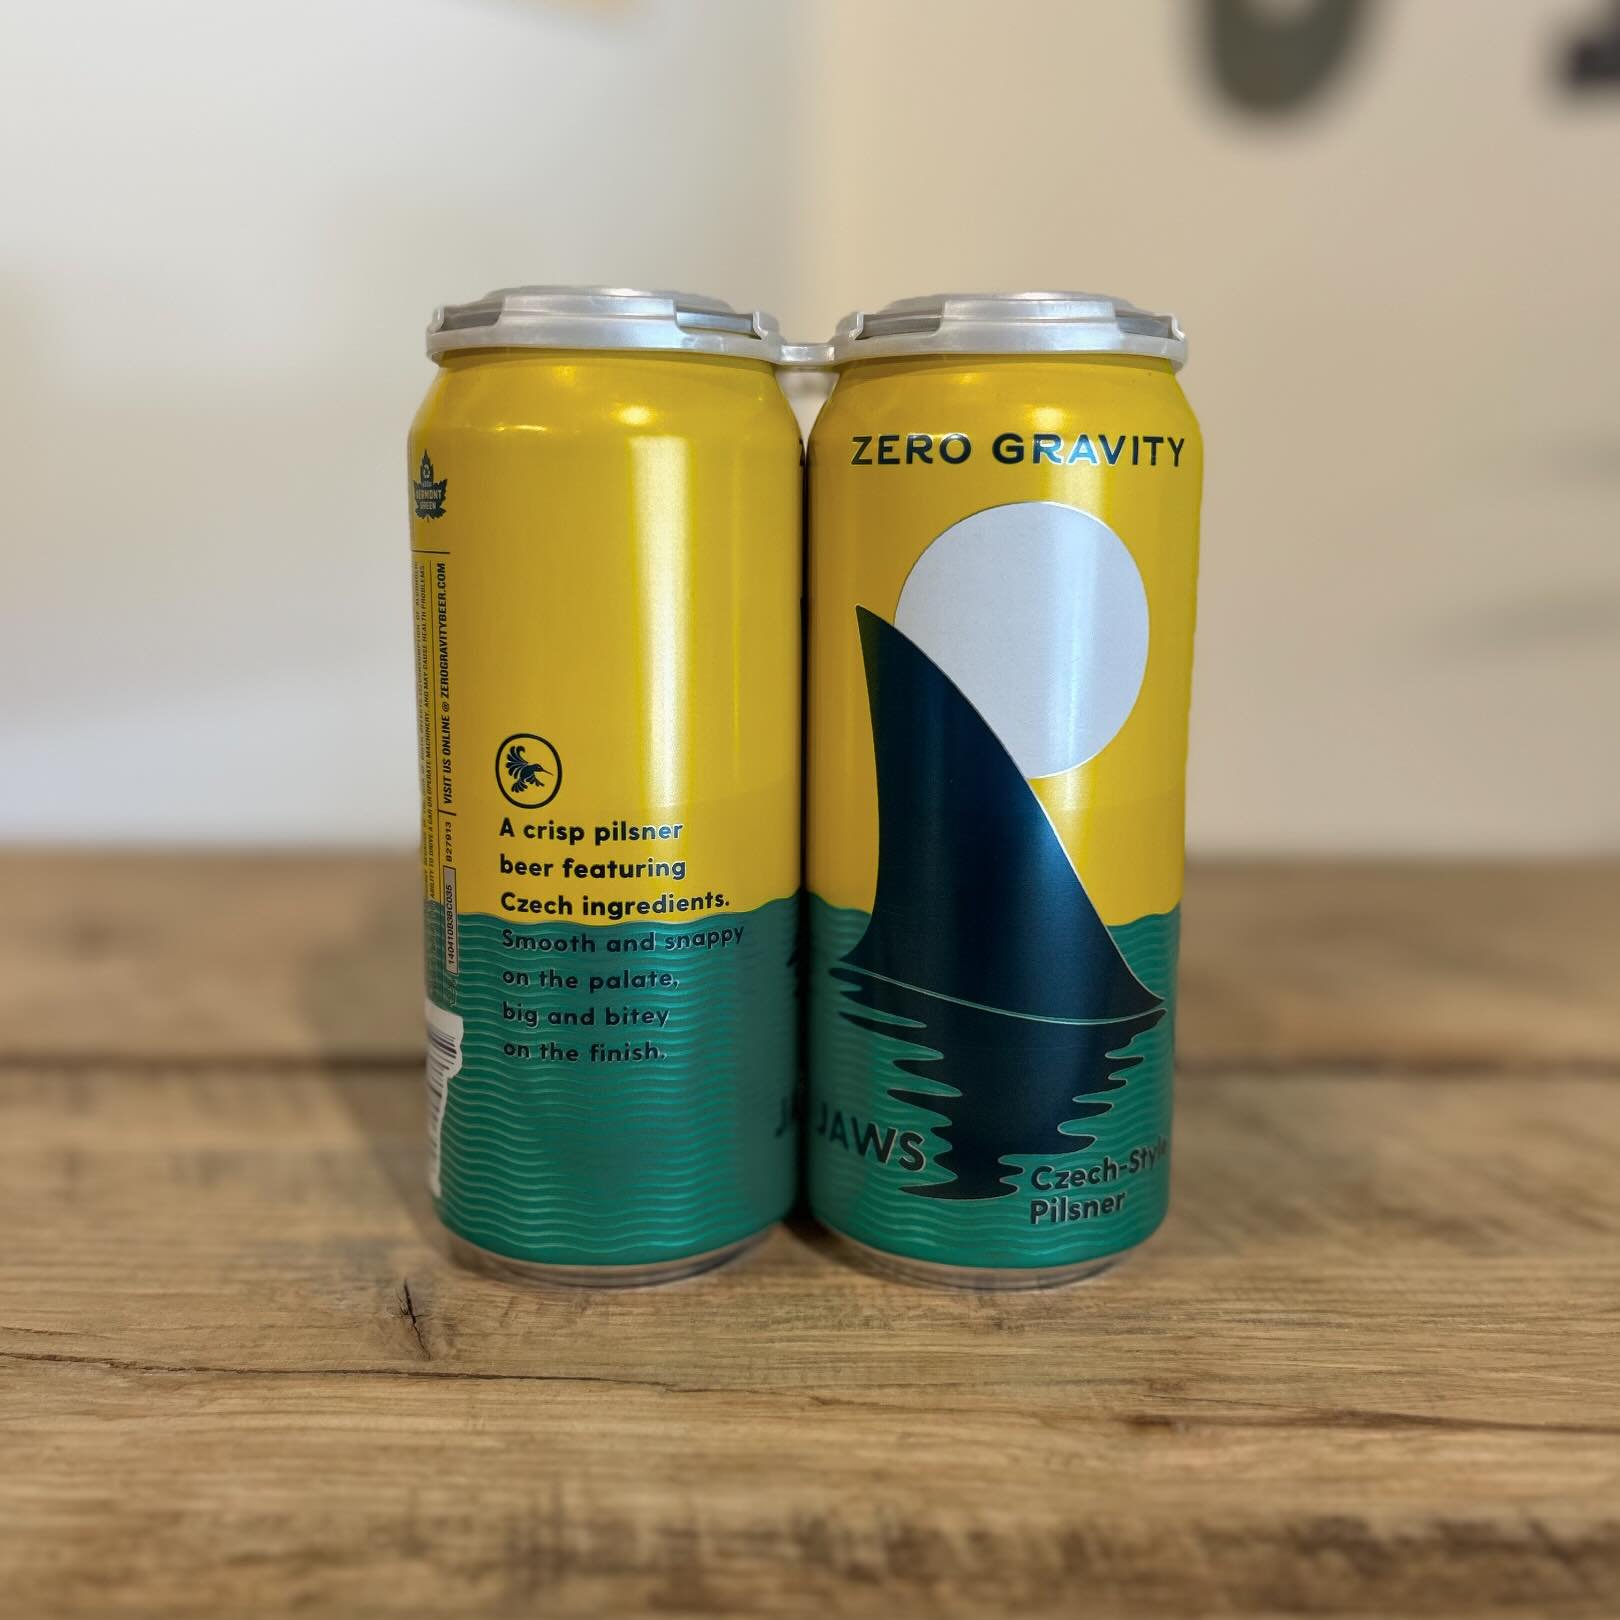 &ldquo;Boys, oh boys&hellip; I think he&rsquo;s come back for his noon feeding.&rdquo; @zerogravitybeer #NowAvailable #SudburyCraftBeer #DrinkLager
&mdash;
JAWS bites back!

This crisp pilsner is smooth and snappy on the palate, big and bitey on the 